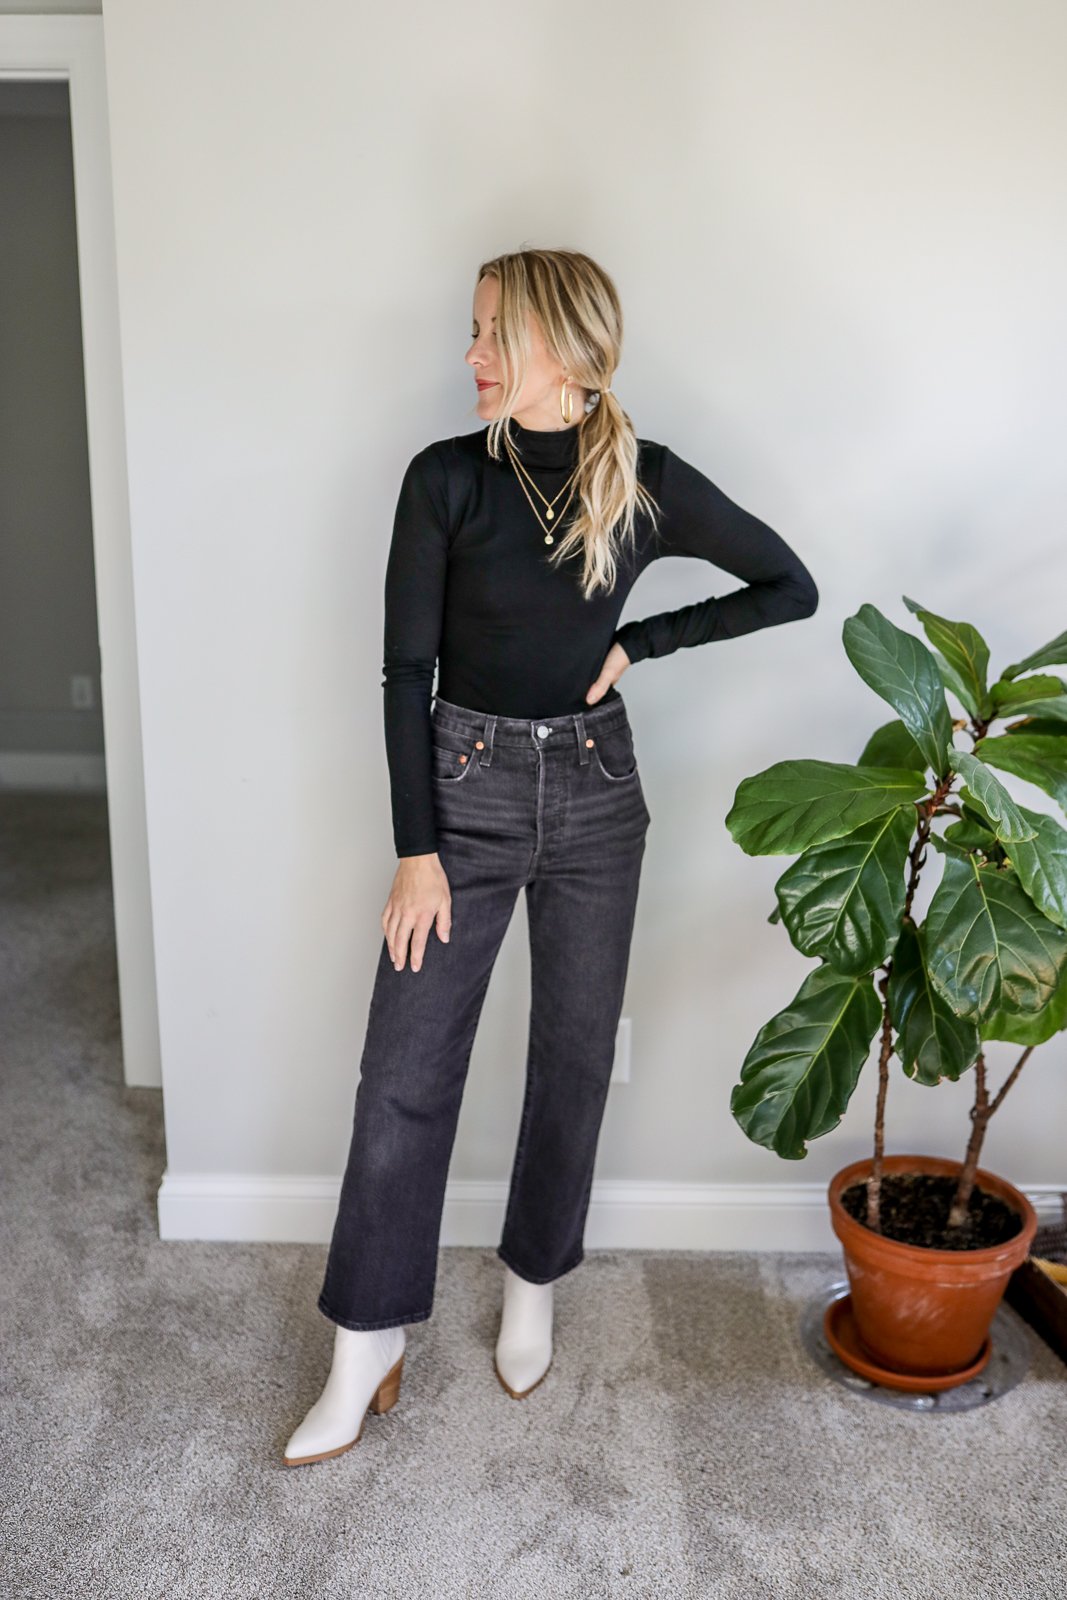 Levi's Ribcage Jeans Review - Are They Worth the Hype? - Paisley & Sparrow